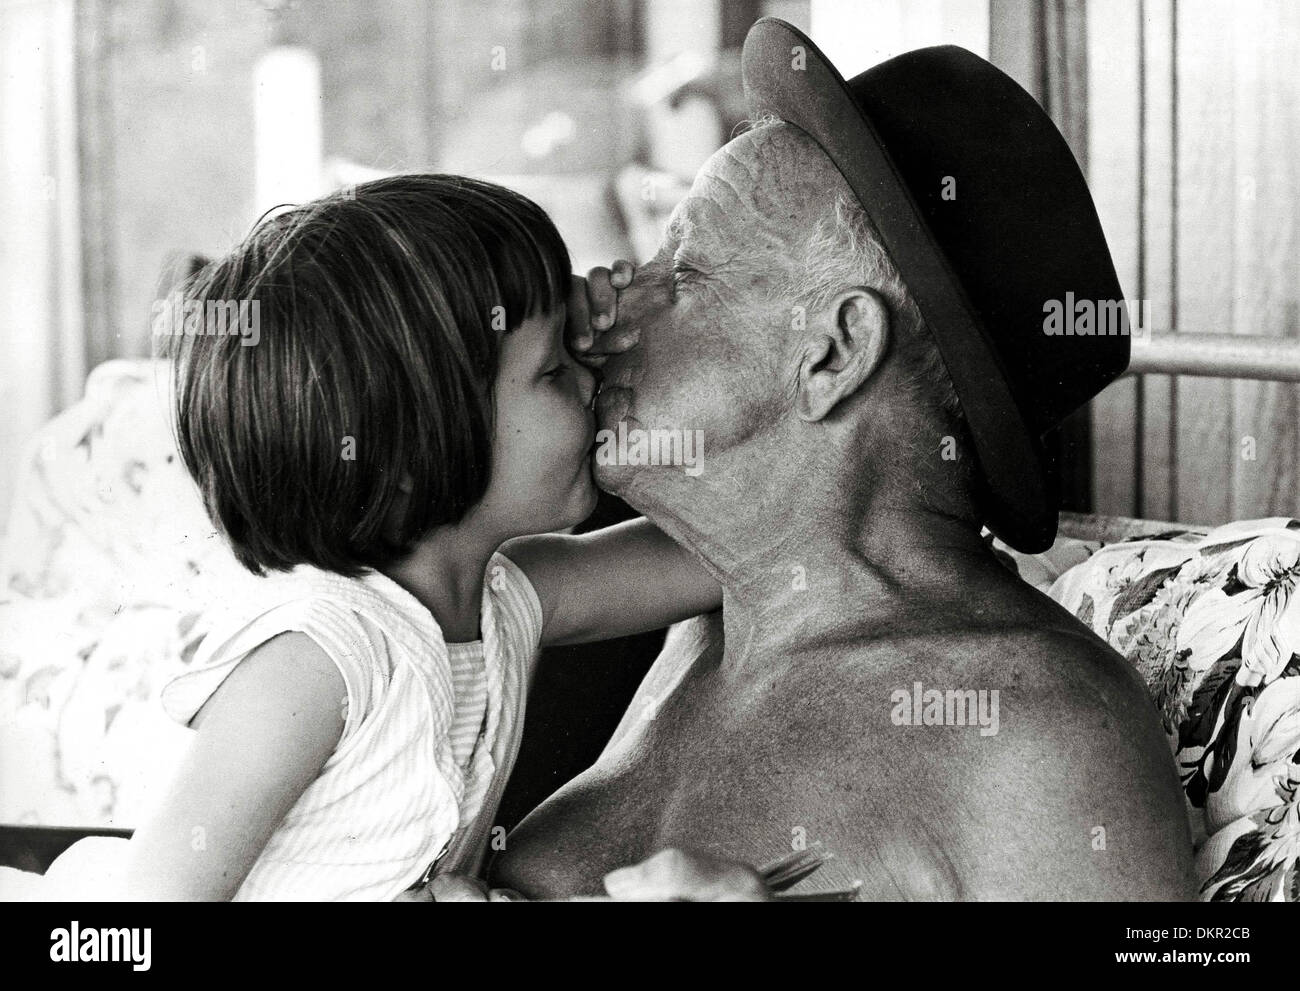 Sept. 18, 2002 - JIMMY DURANTE AND DAUGHTER CEE CEE.Â©BILL KOBRIN